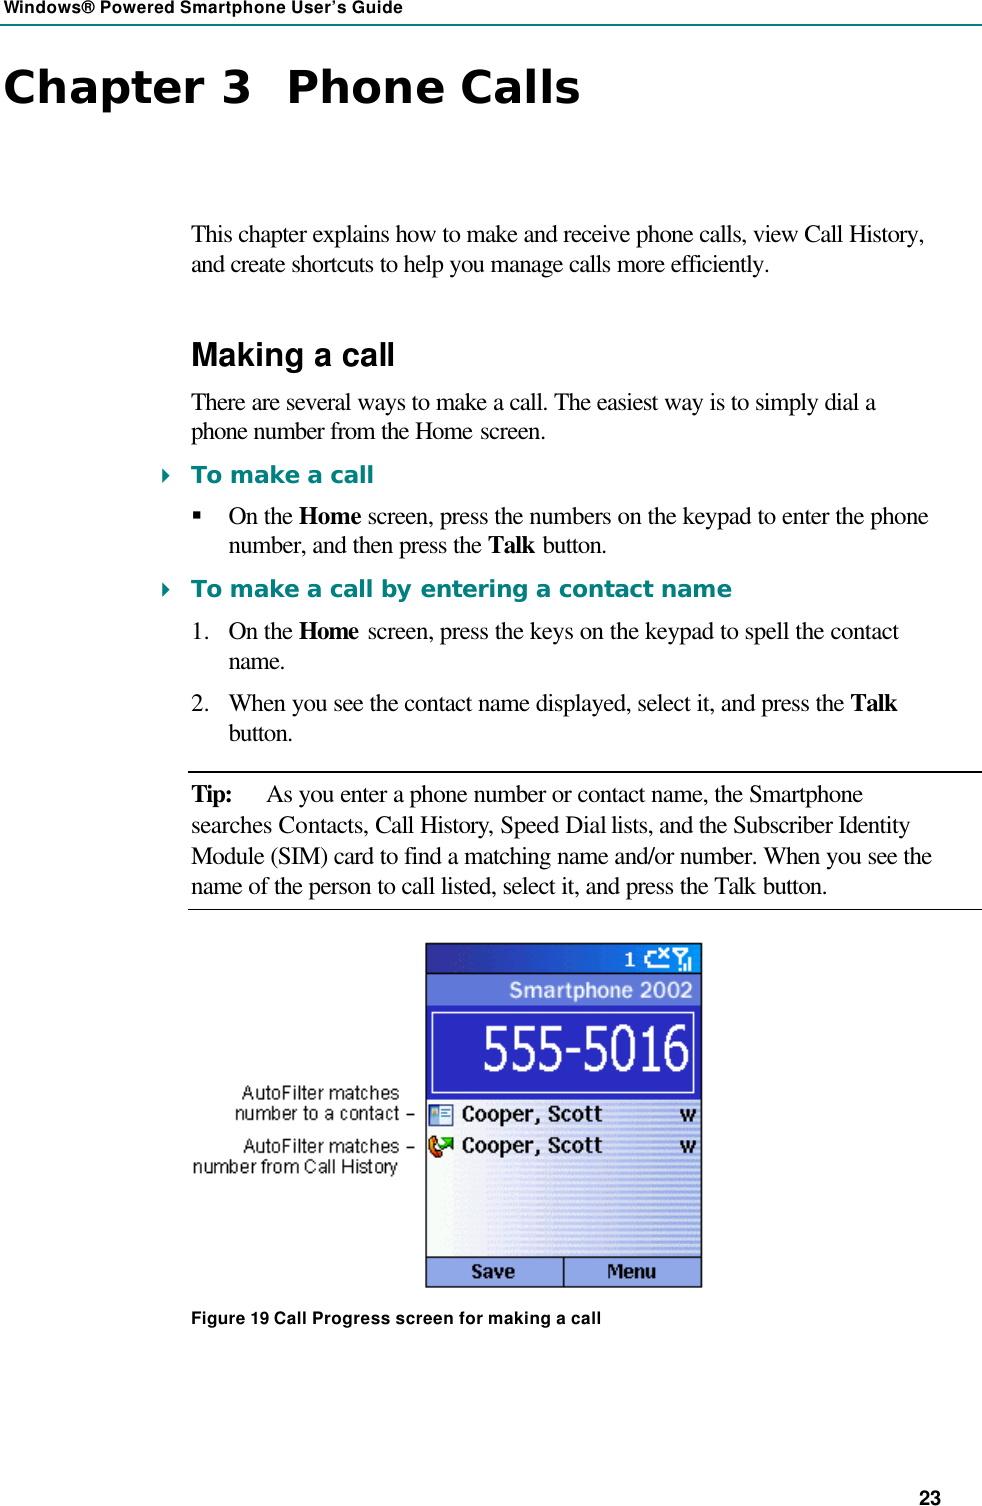 Windows® Powered Smartphone User’s Guide 23 Chapter 3  Phone Calls This chapter explains how to make and receive phone calls, view Call History, and create shortcuts to help you manage calls more efficiently. Making a call There are several ways to make a call. The easiest way is to simply dial a phone number from the Home screen. 4 To make a call § On the Home screen, press the numbers on the keypad to enter the phone number, and then press the Talk button. 4 To make a call by entering a contact name 1.  On the Home screen, press the keys on the keypad to spell the contact name. 2.  When you see the contact name displayed, select it, and press the Talk button. Tip: As you enter a phone number or contact name, the Smartphone searches Contacts, Call History, Speed Dial lists, and the Subscriber Identity Module (SIM) card to find a matching name and/or number. When you see the name of the person to call listed, select it, and press the Talk button.  Figure 19 Call Progress screen for making a call 